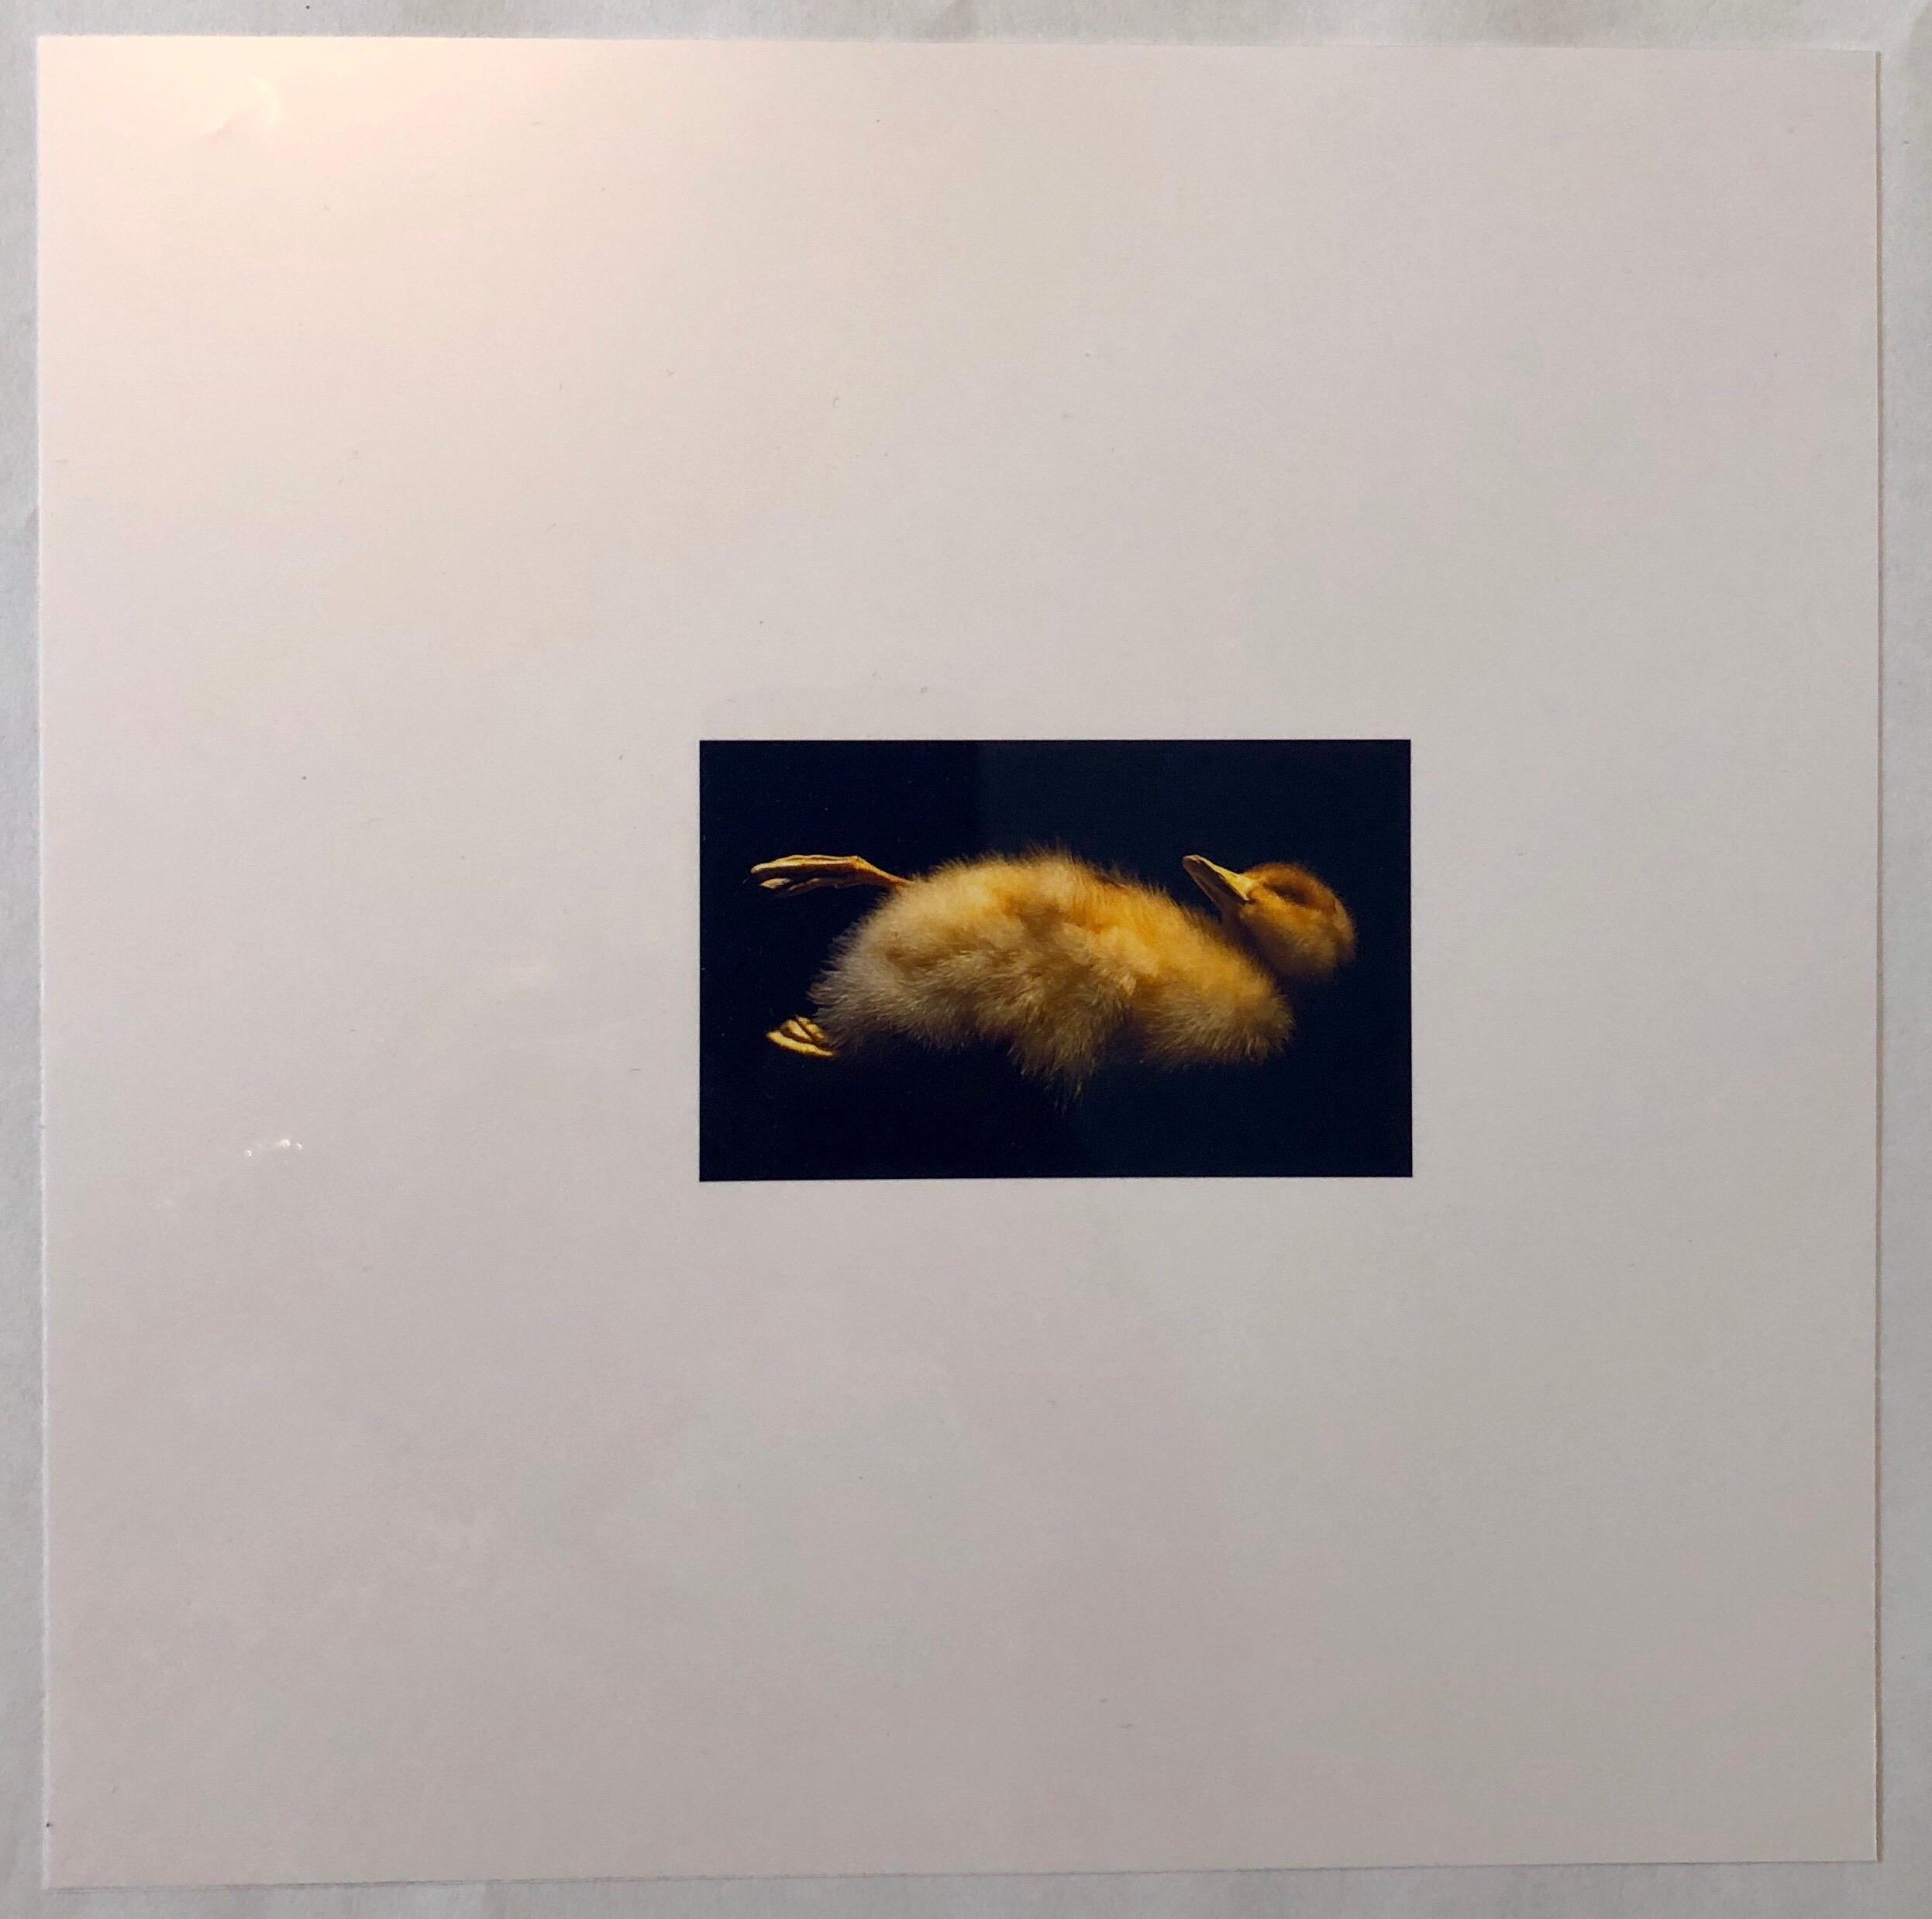 This is a proof print. Stamped with the Muse X stamp and marked NFS.
This is a single print from 1998 Birds. Suite of eight Cibachromes. Edition of fifteen. 10″ × 10″ (sheet size). Muse [X] Editions. Taxidermy Bird.
Brenda Zlamany has shown widely